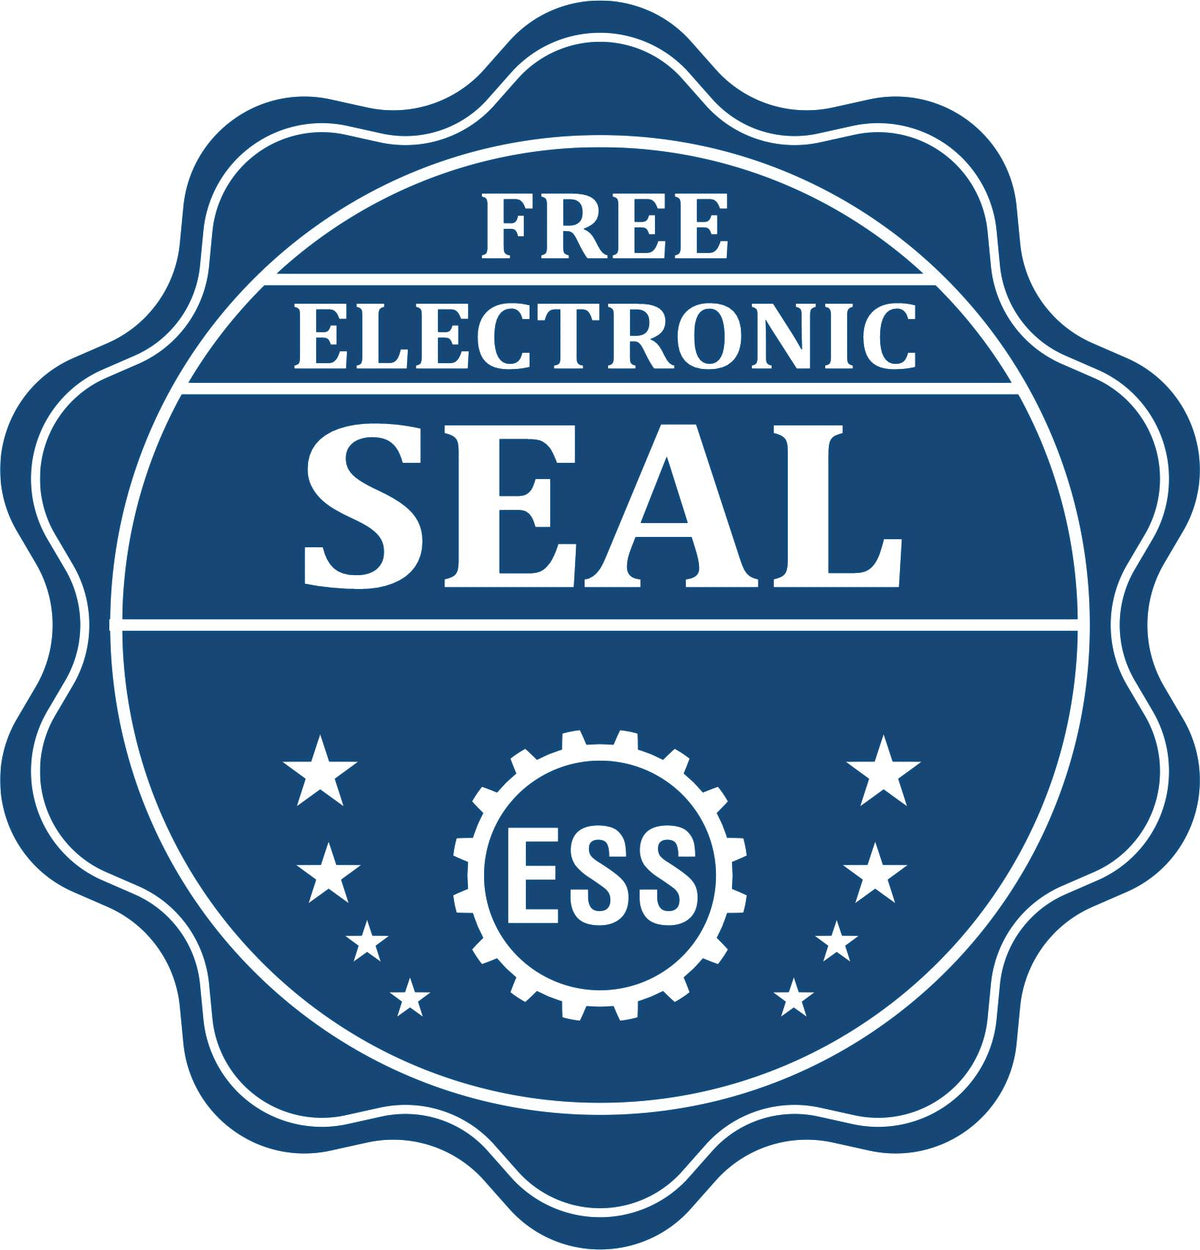 A badge showing a free electronic seal for the Slim Pre-Inked Kansas Architect Seal Stamp with stars and the ESS gear on the emblem.